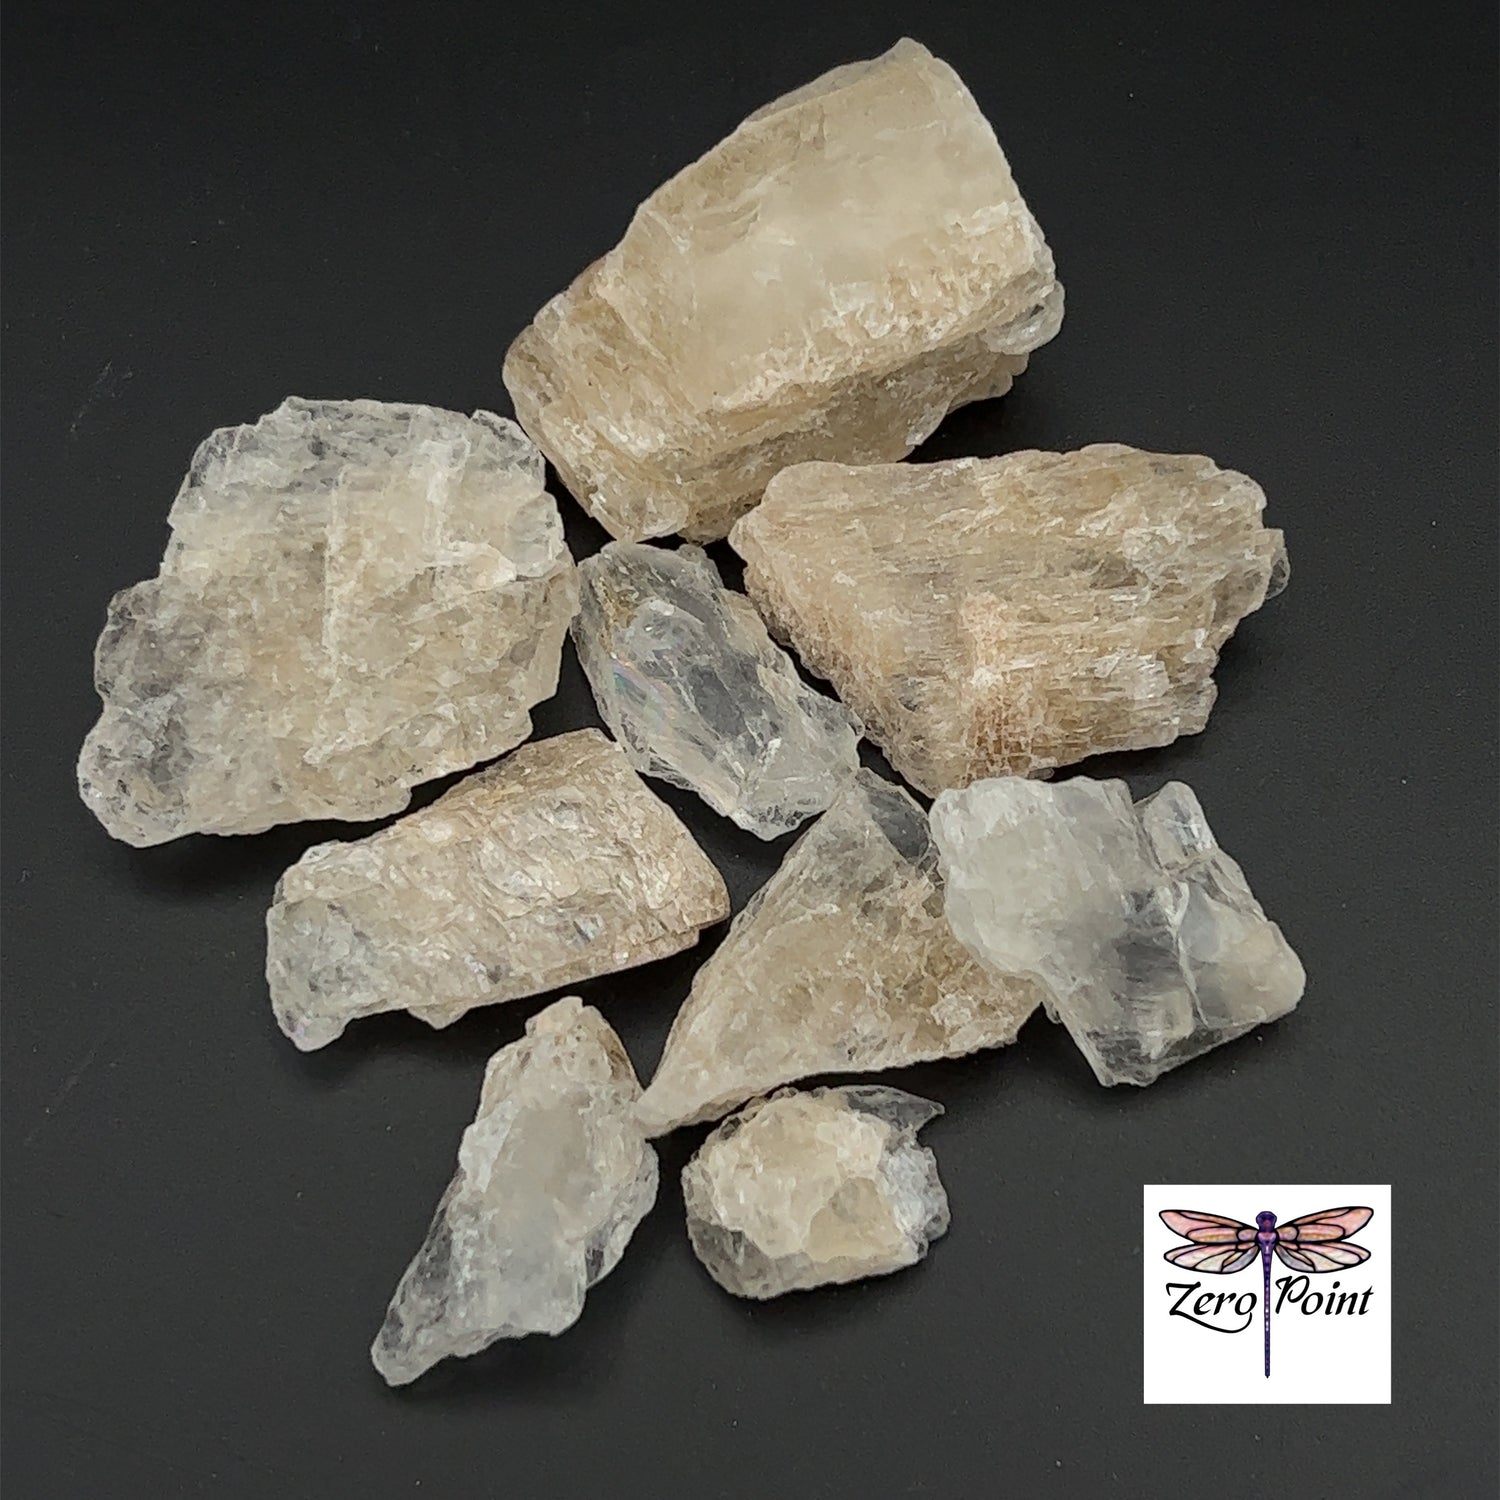 Petalite by the gram - Zero Point Crystals